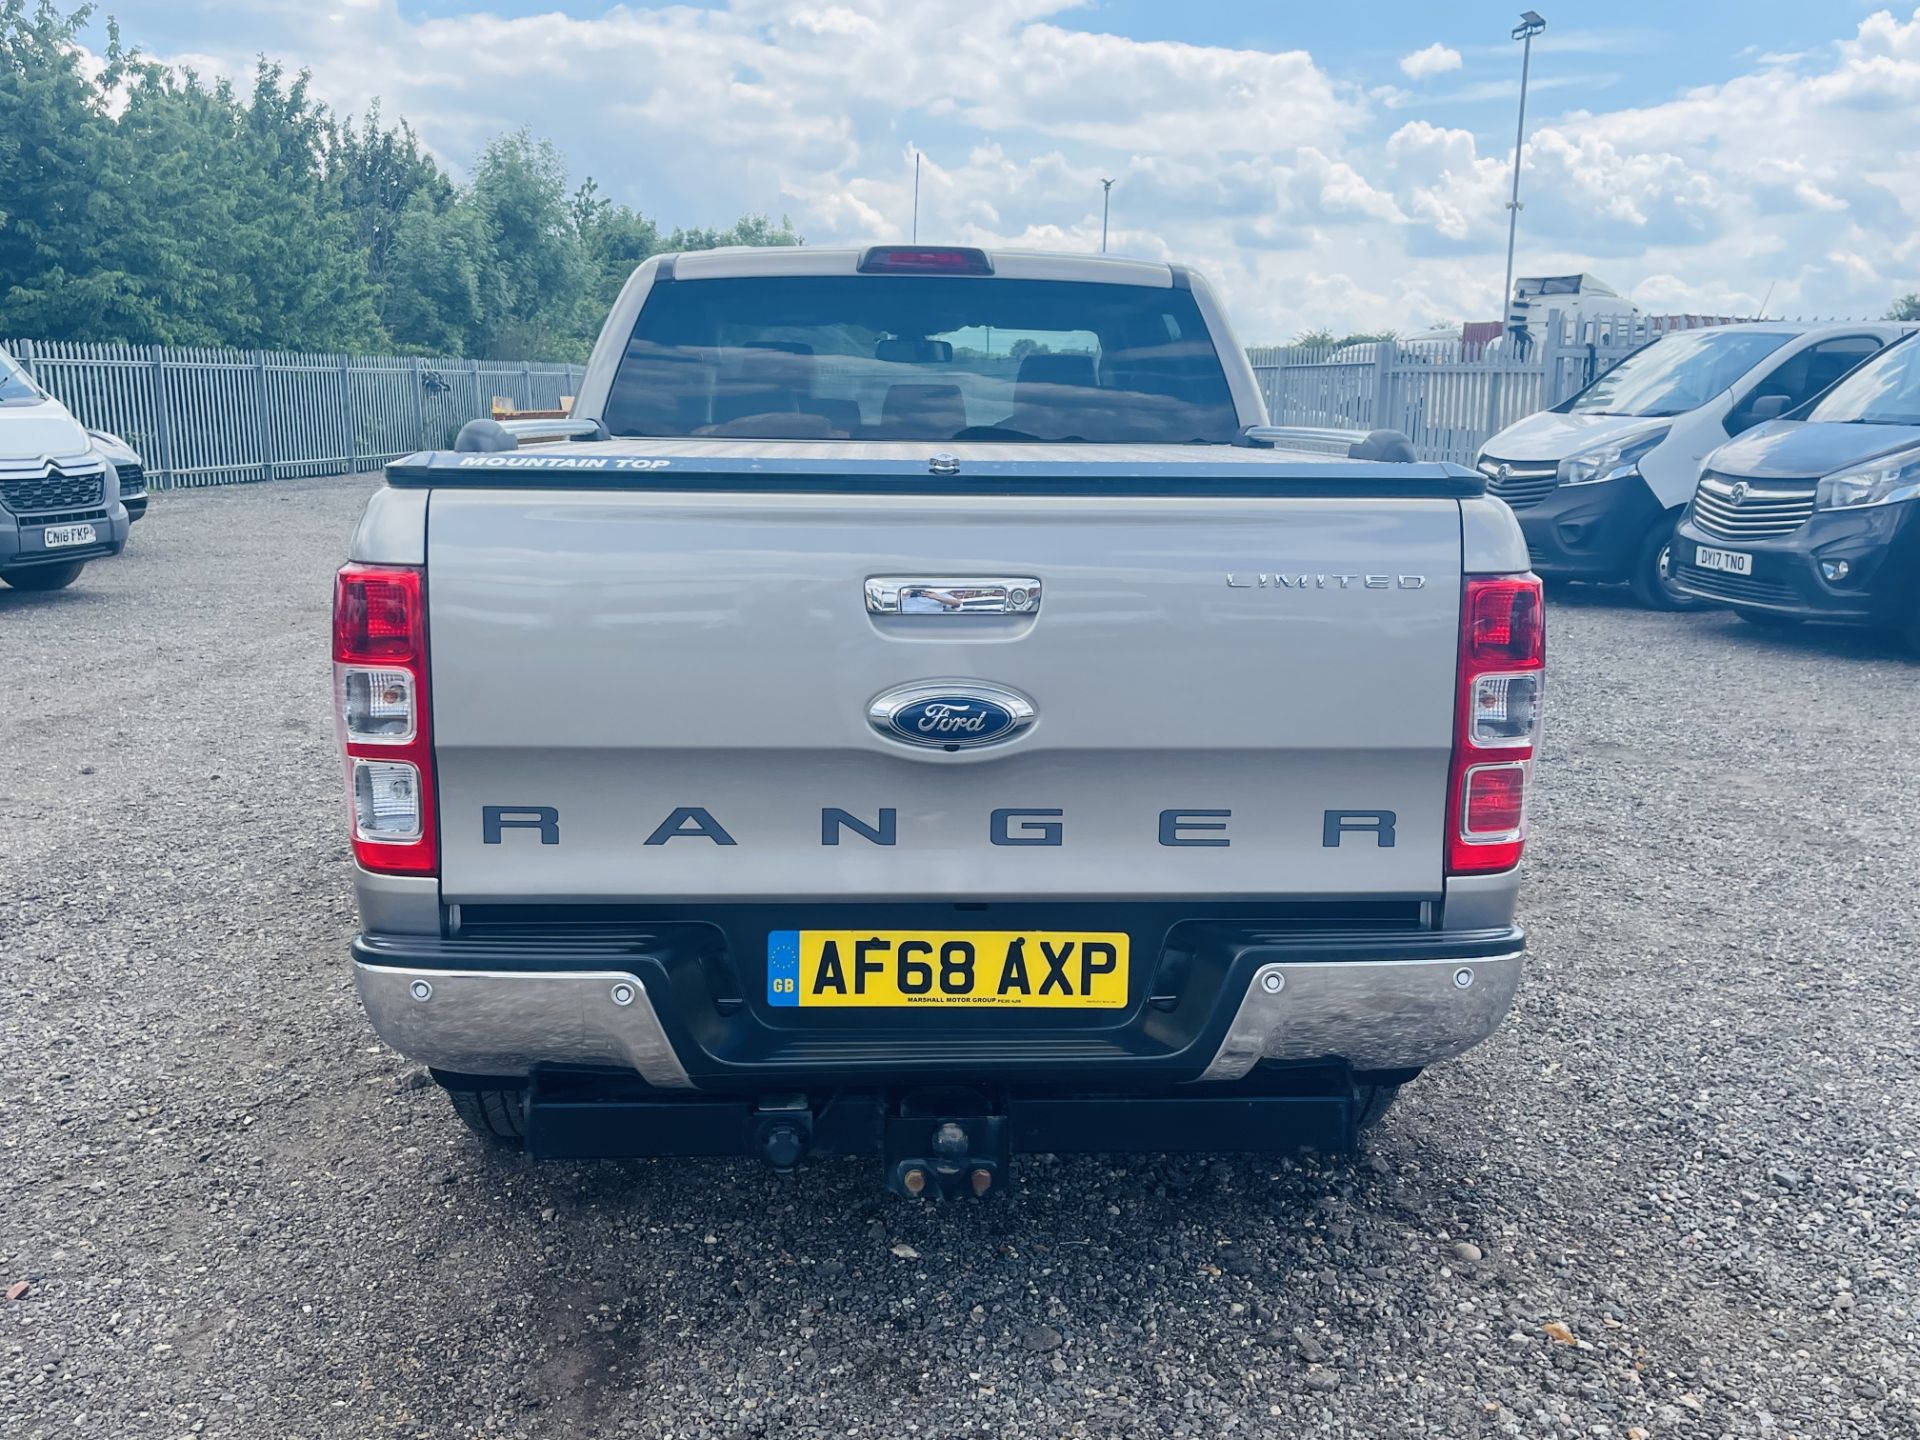 ** ON SALE ** Ford Ranger 3.2 TDCI Limited 2018 '68 Reg' Auto 4WD - Sat Nav - A/C - Euro 6 - Image 11 of 35